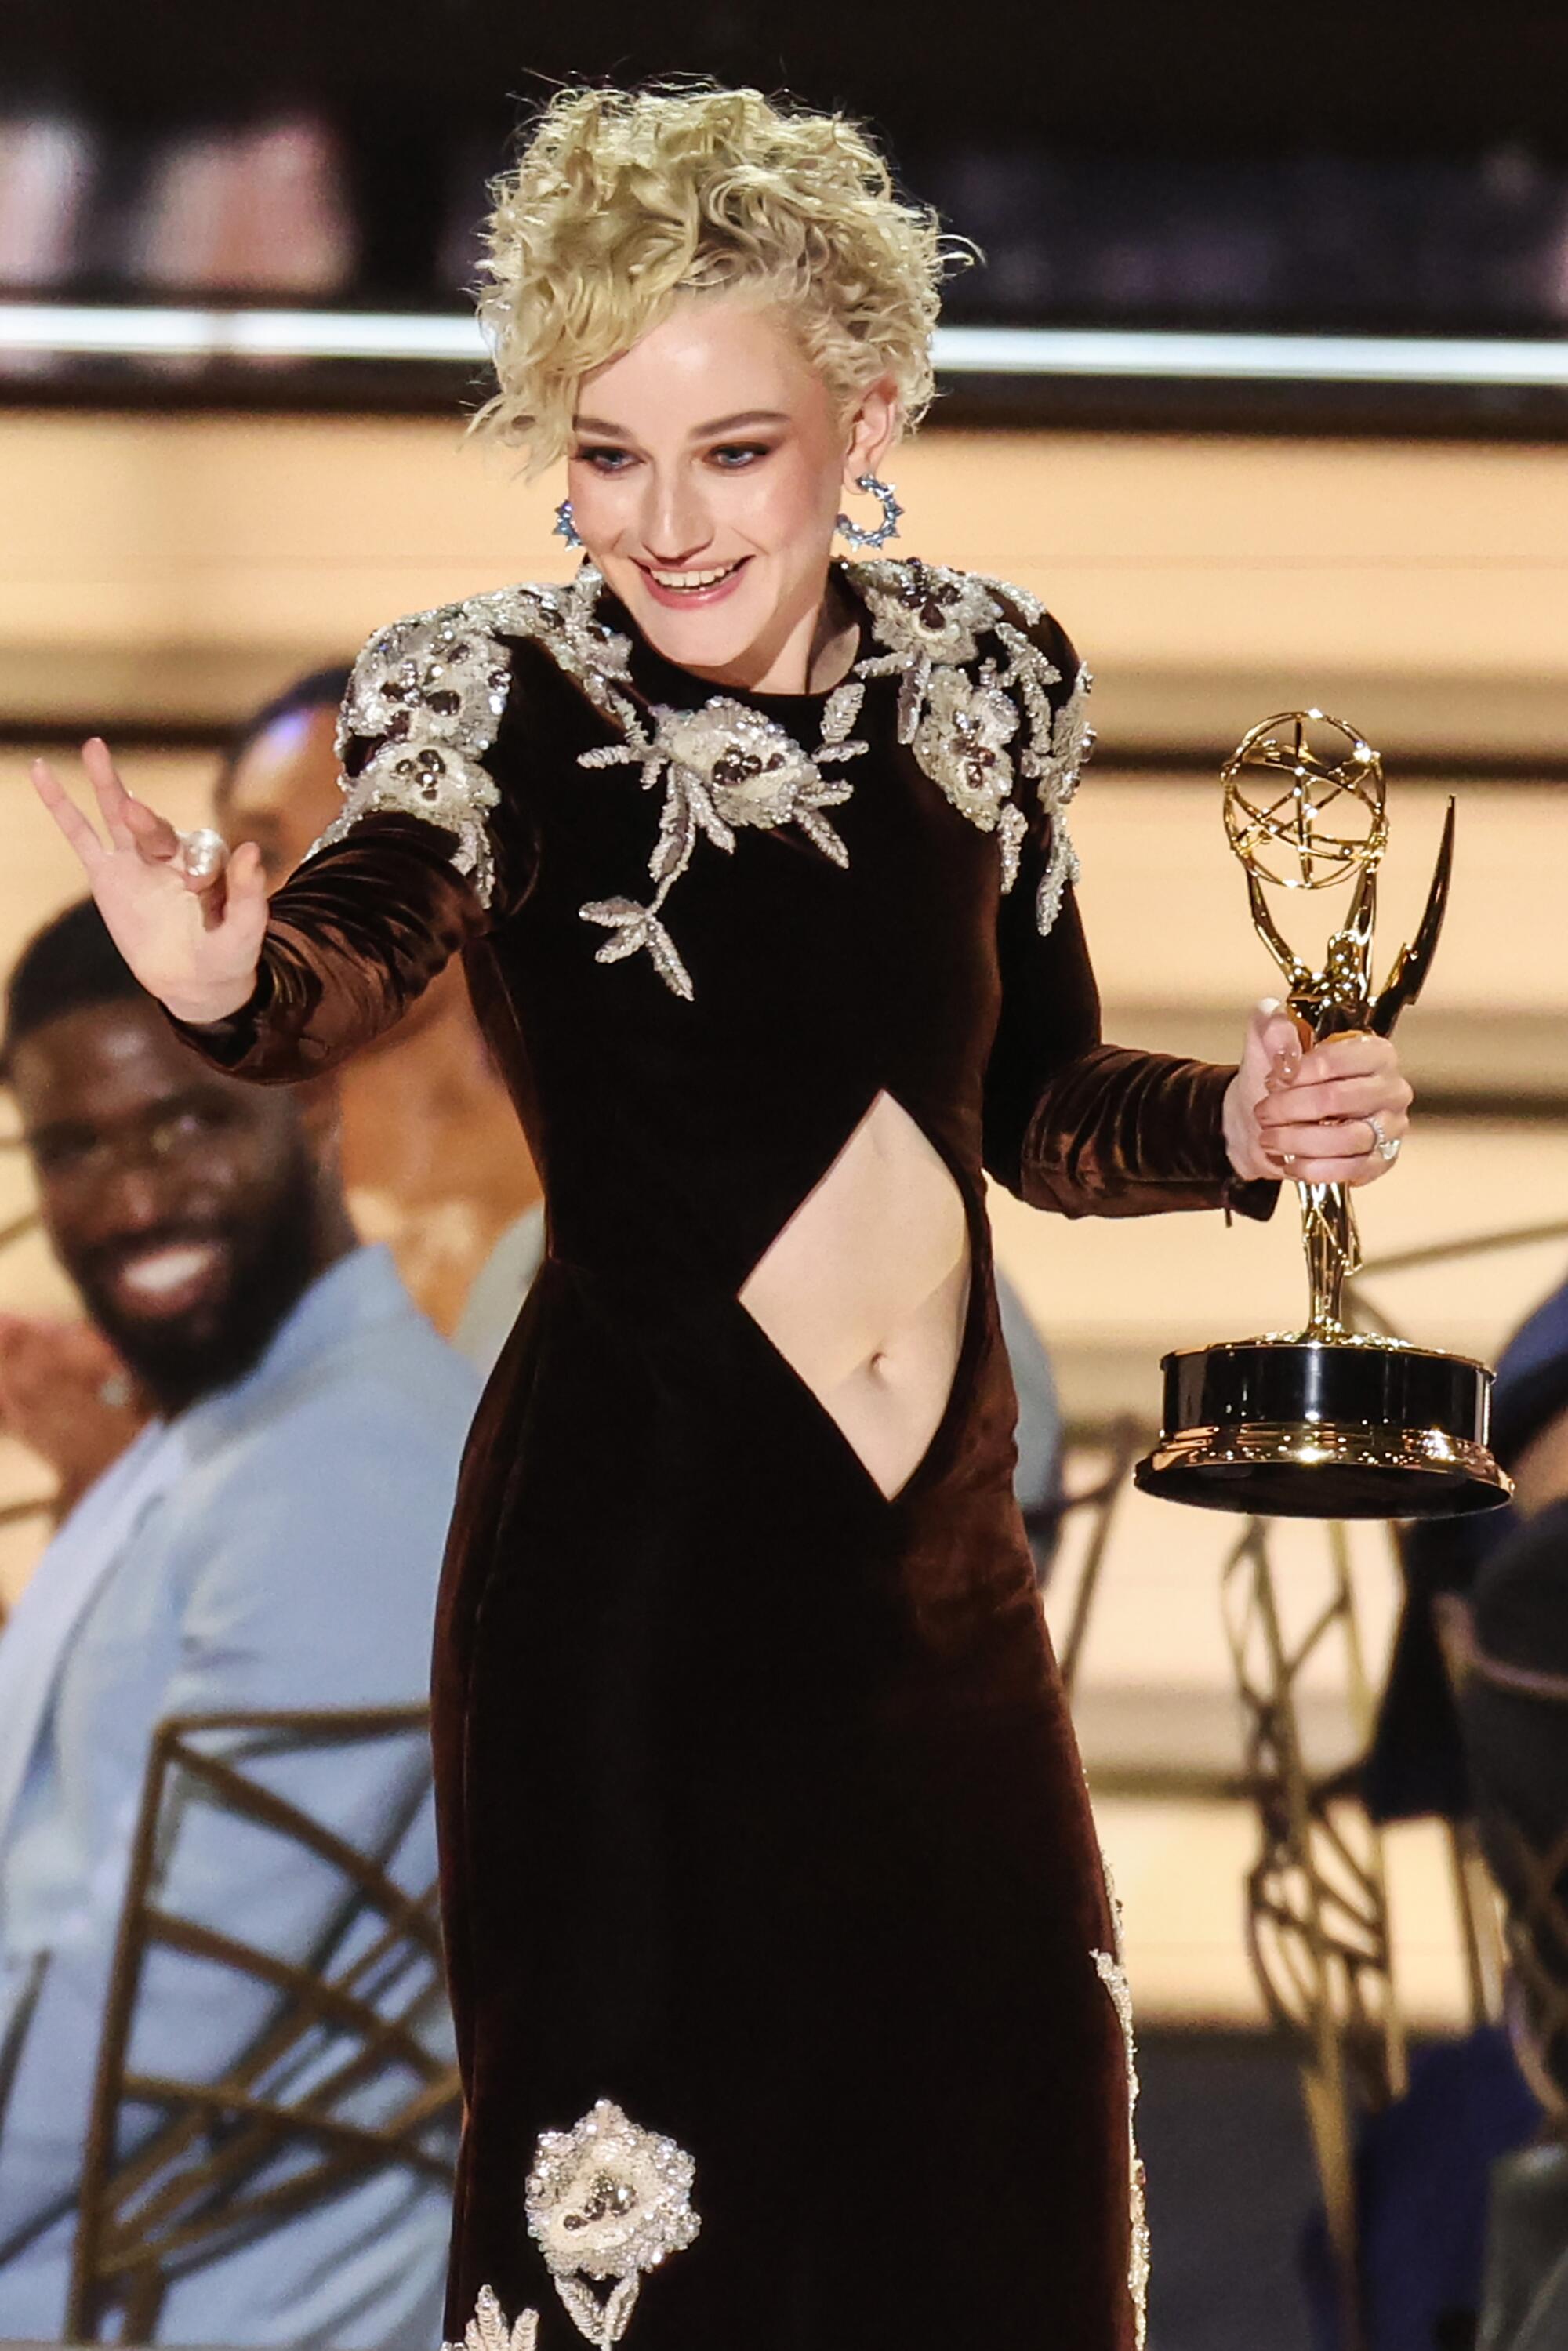 Julia Garner accepts the award for Outstanding Supporting Actress in a Drama Series award for "Ozark" 